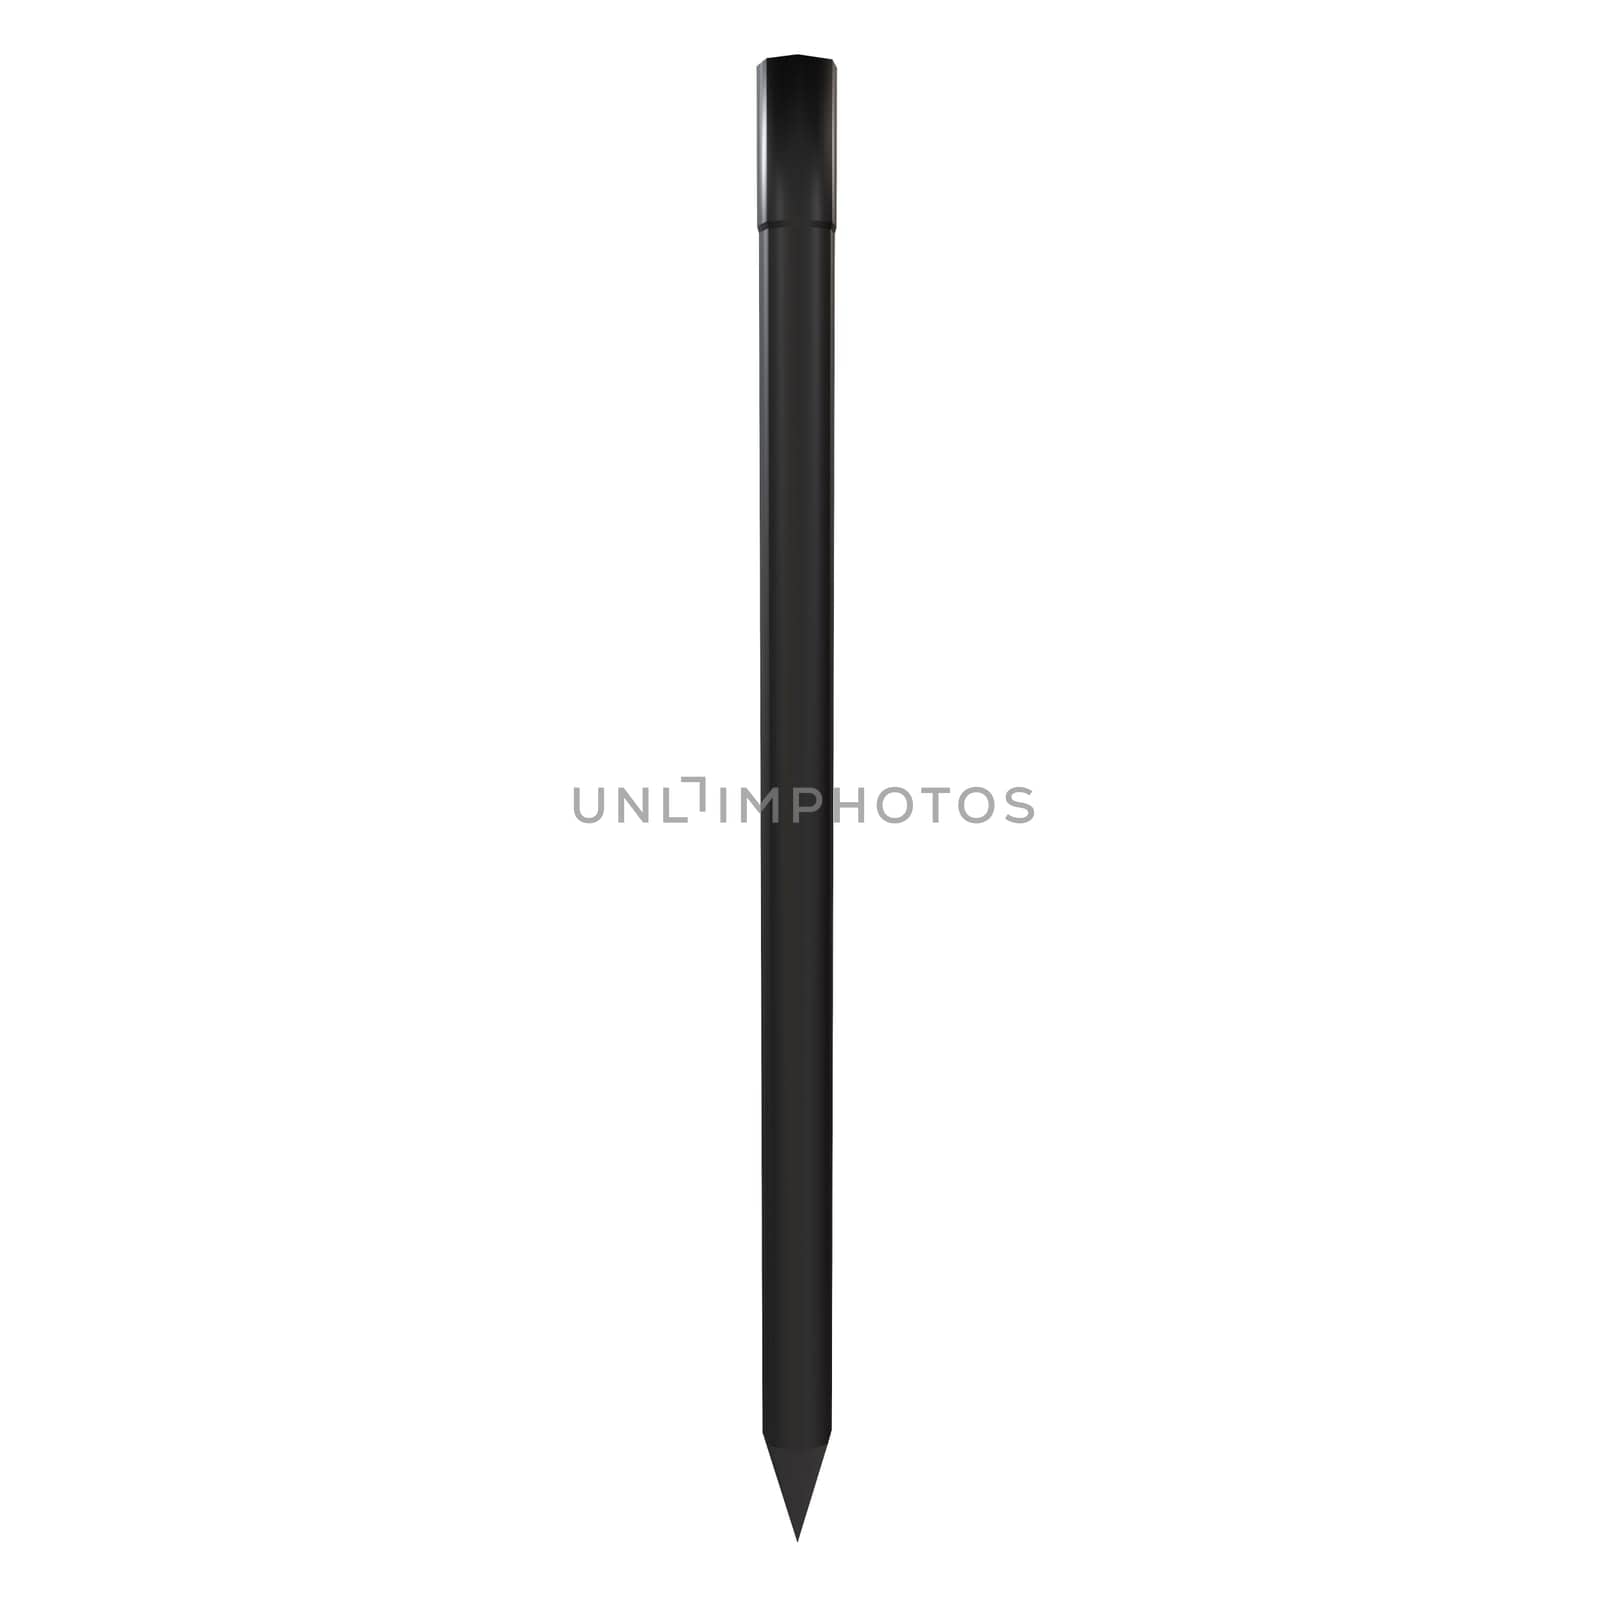 Black Pencil isolated on white background. High quality 3d illustration